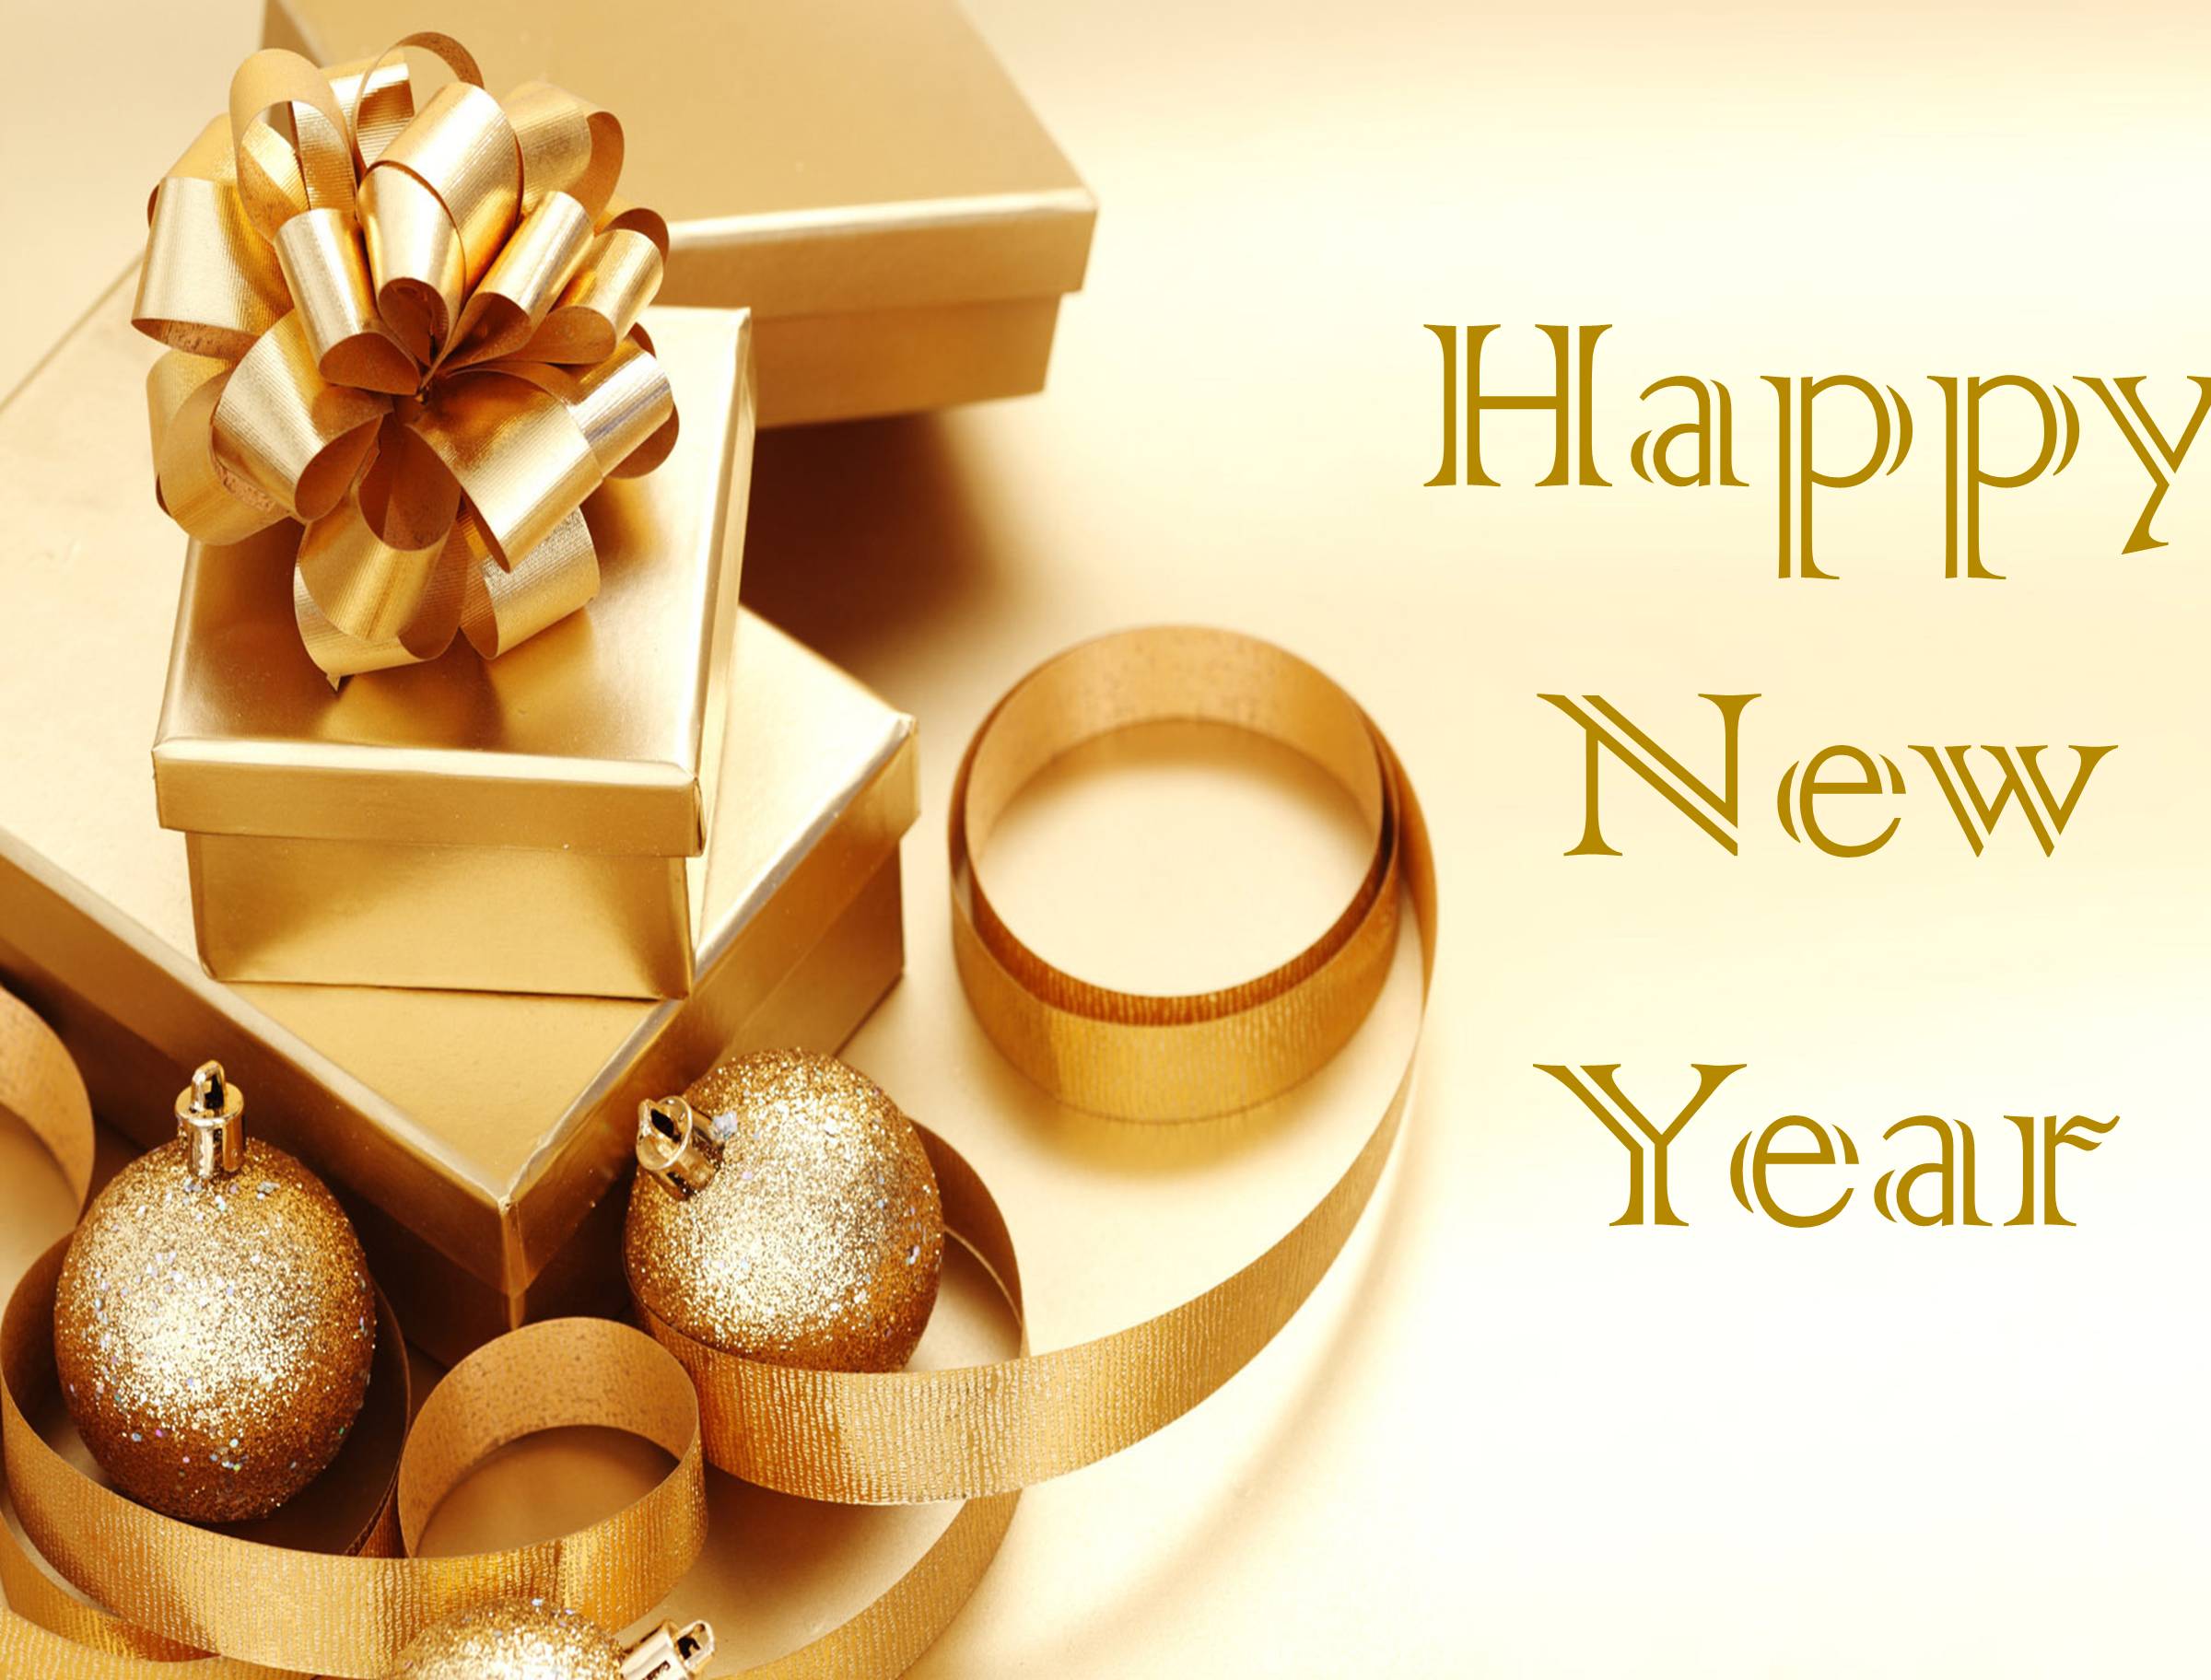 happy new year hd wallpaper download,present,wedding favors,fashion accessory,cuisine